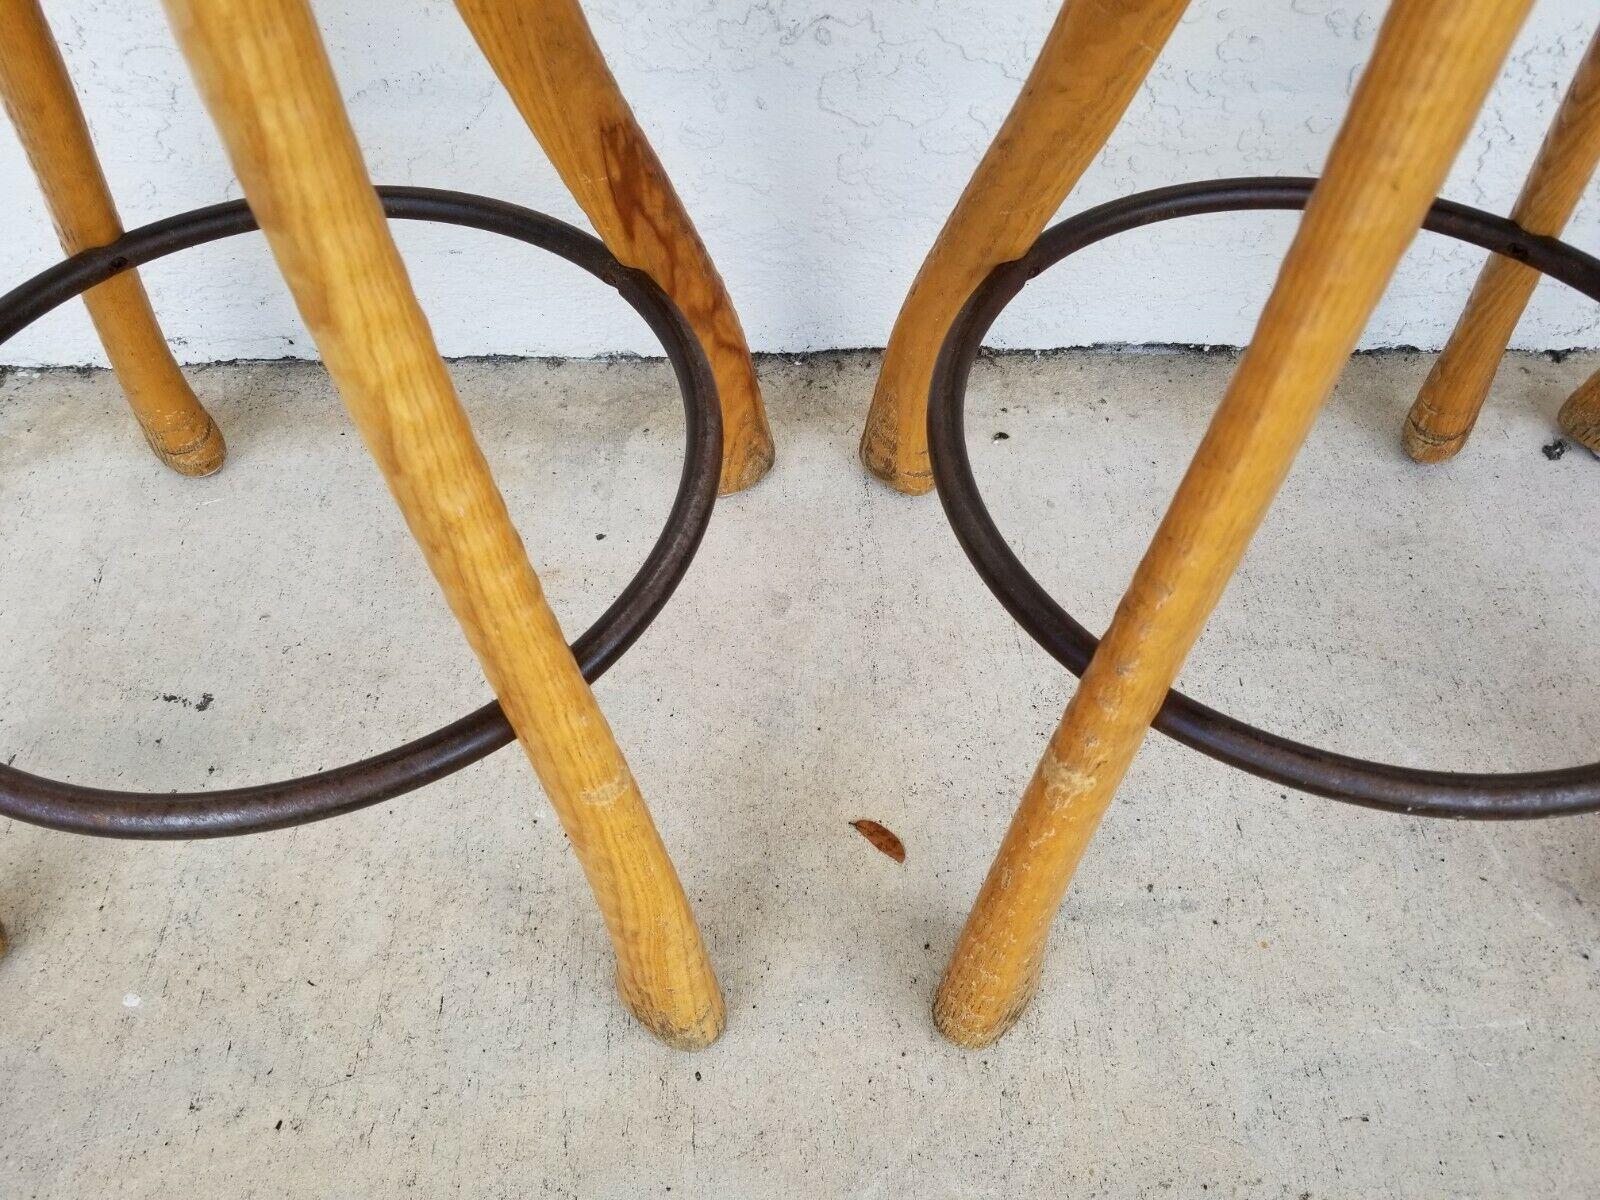 20th Century Rustic Ax Handle Counter Stools, Set of 4